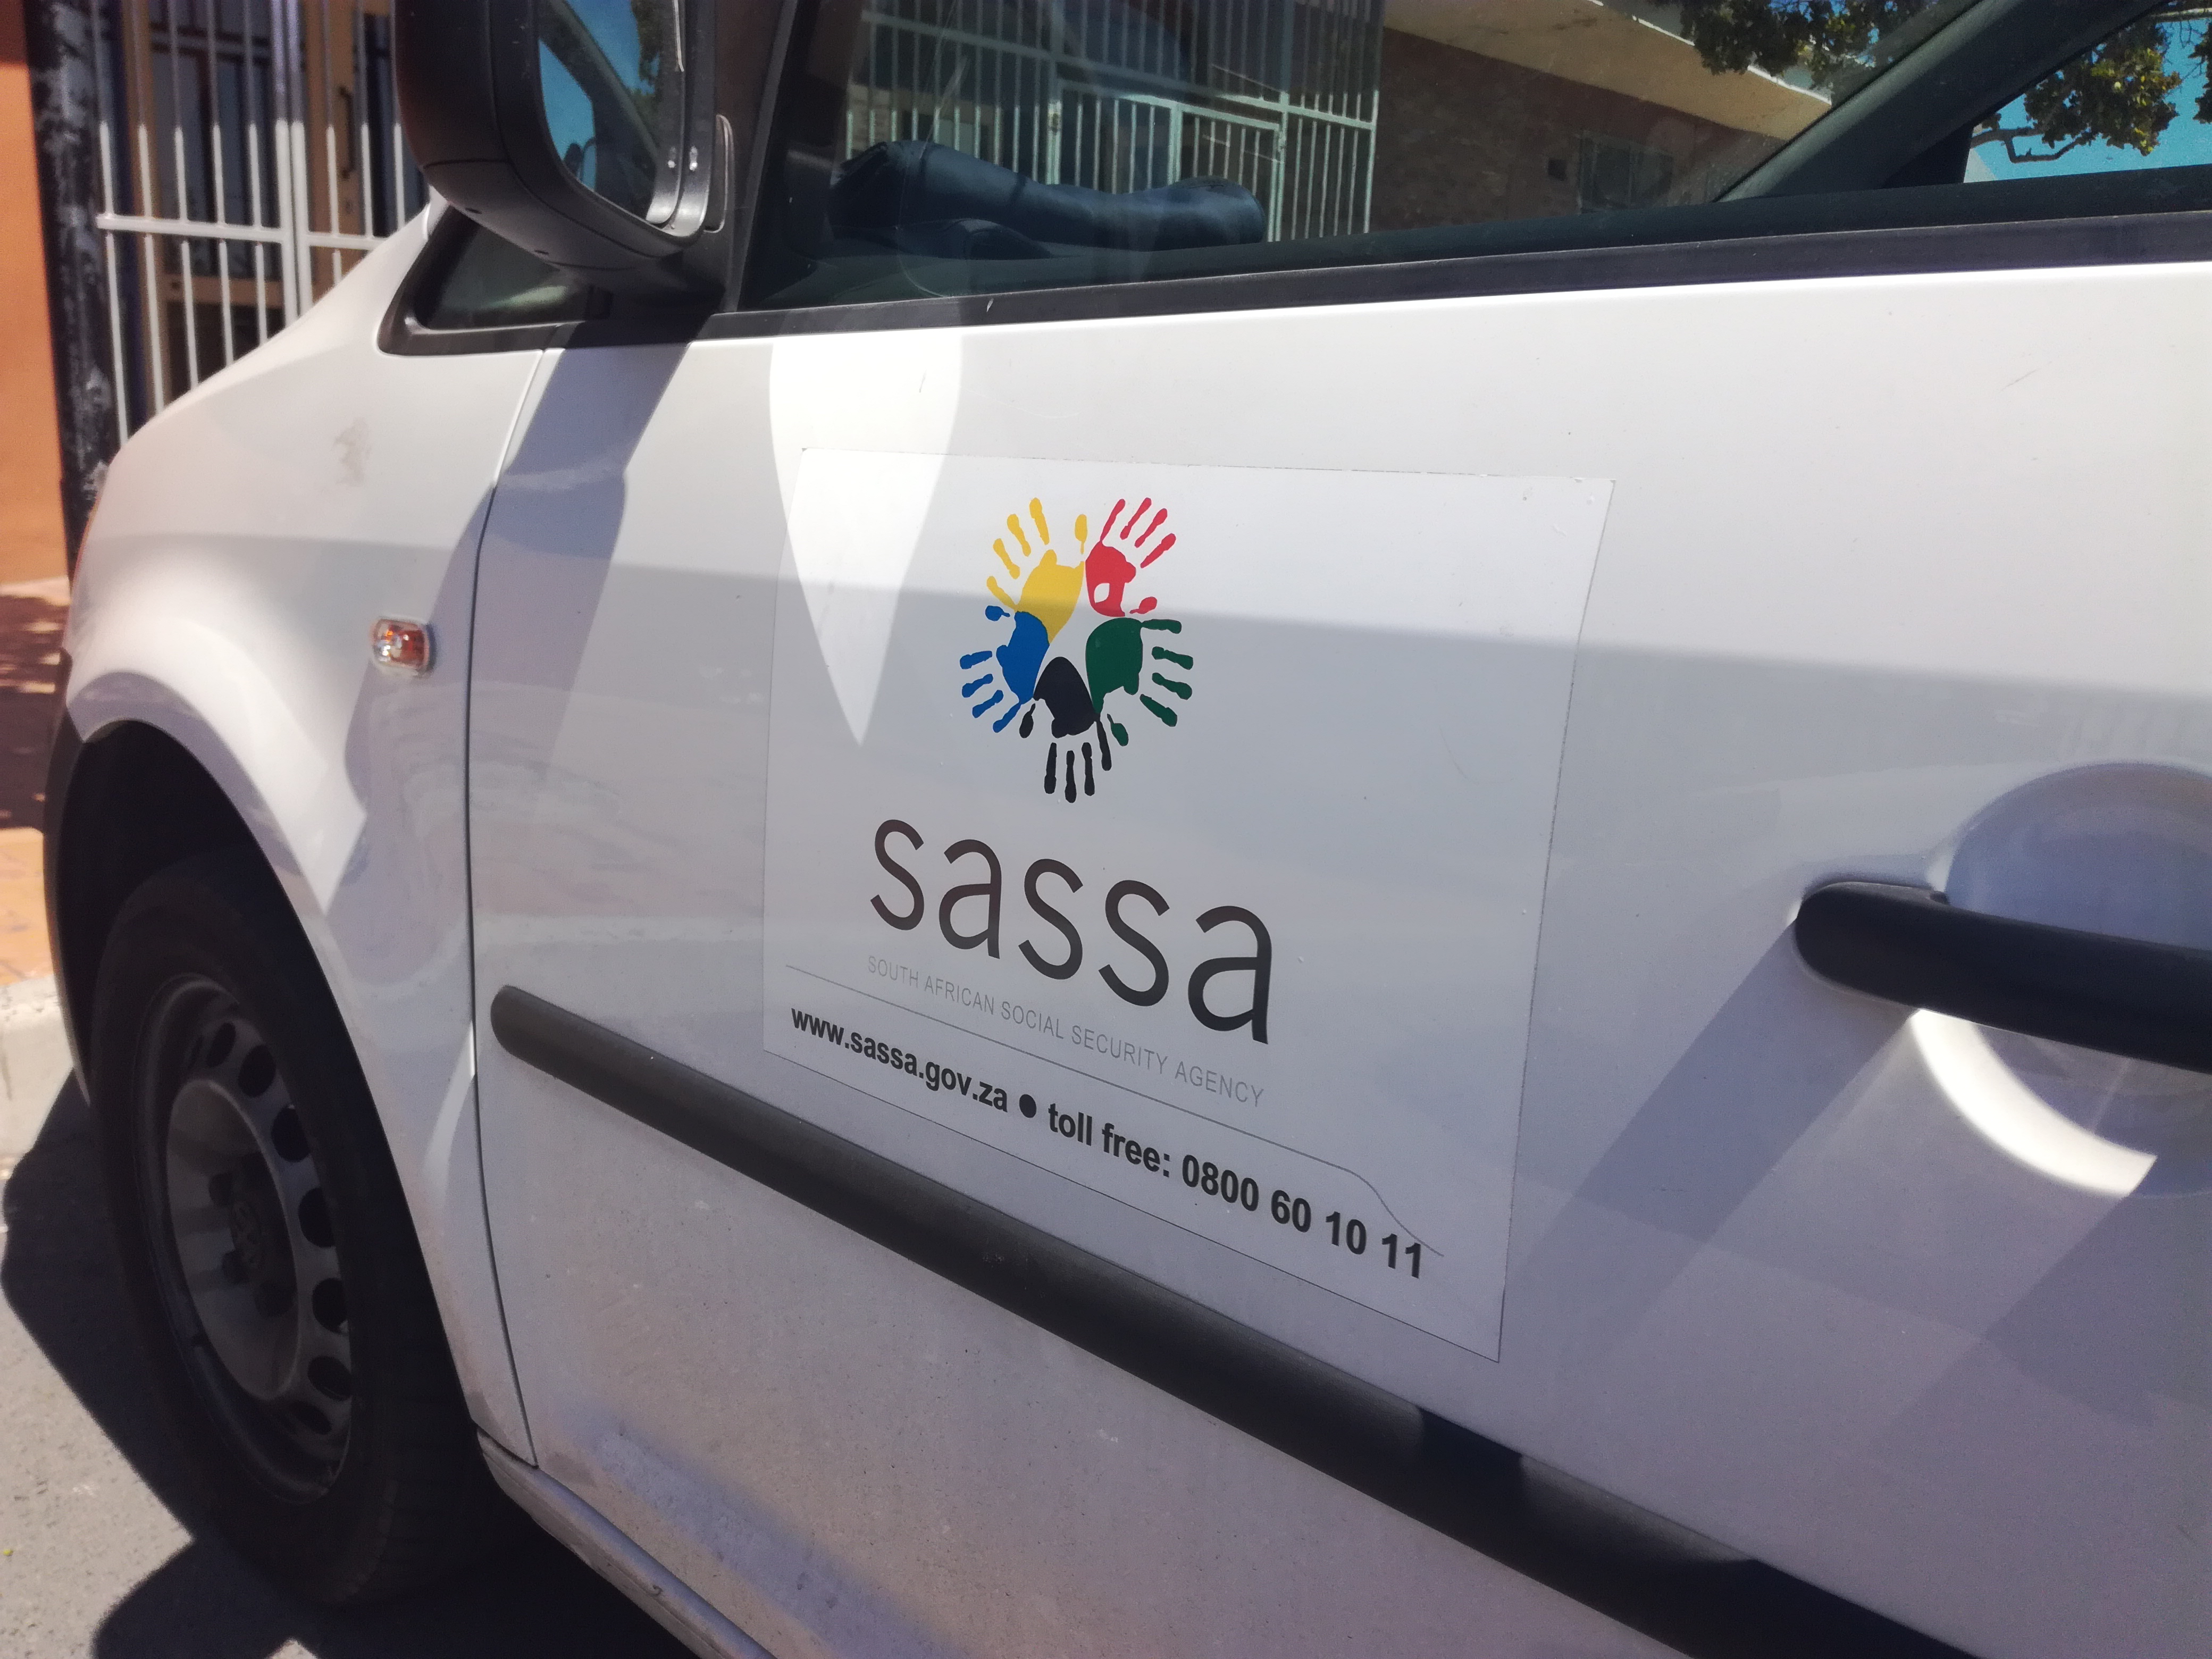 Photo of a car branded with sassa